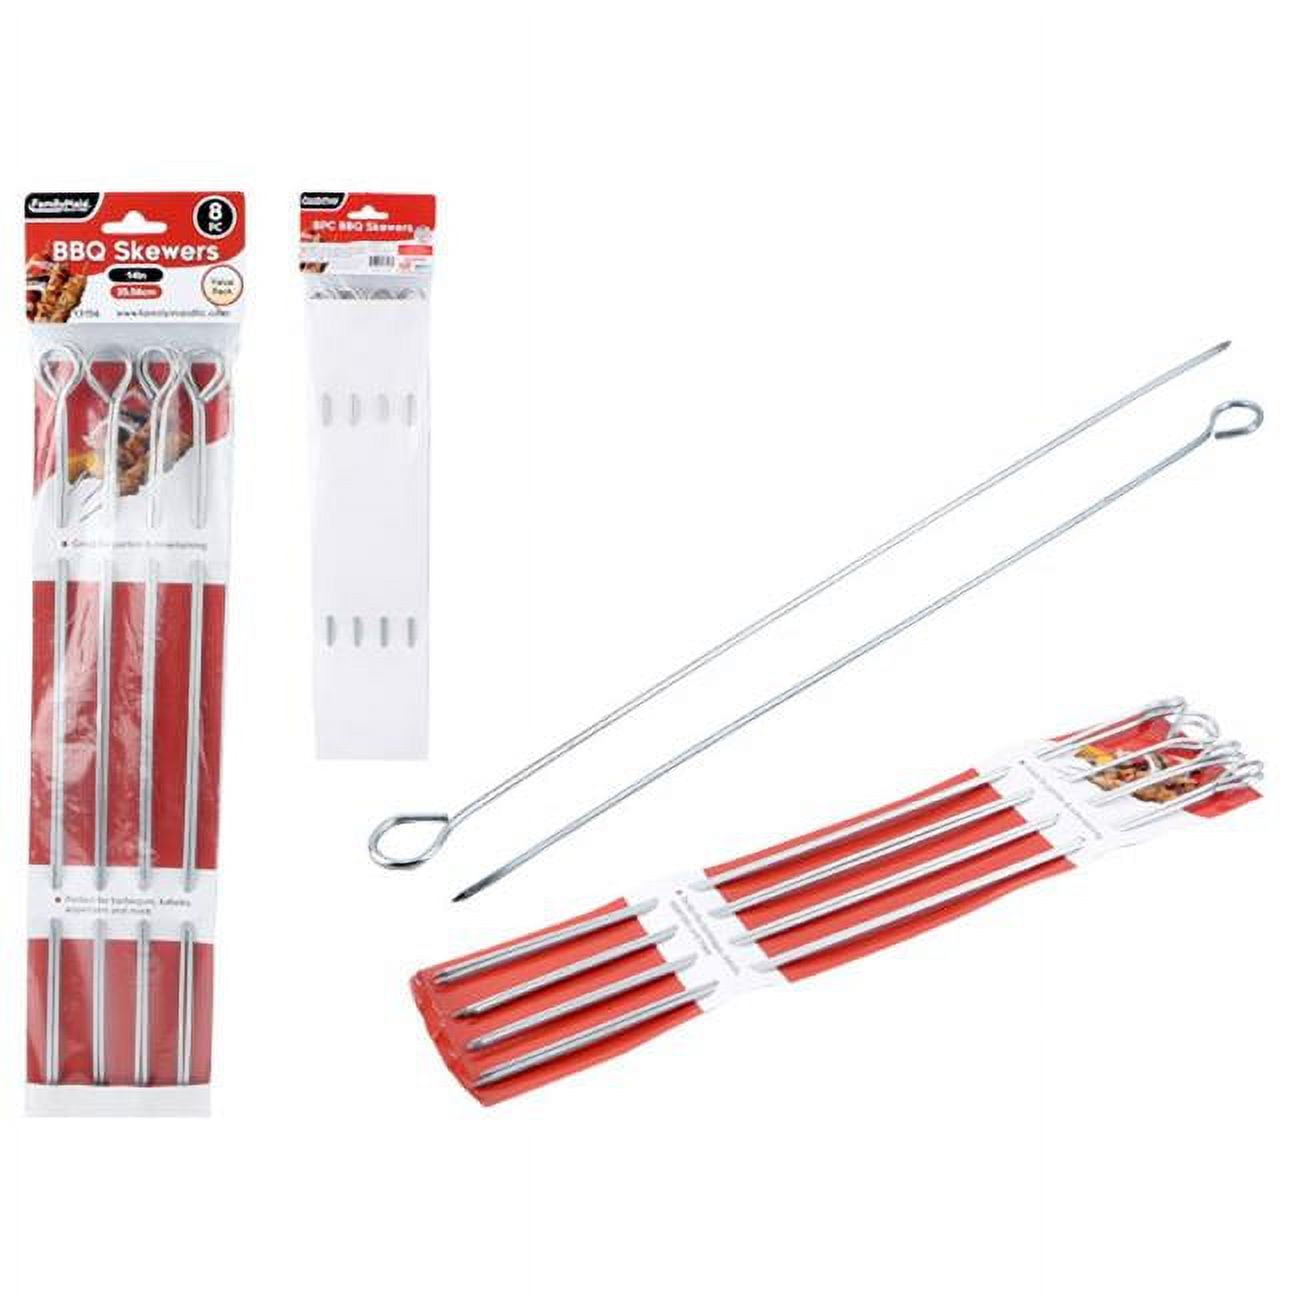 Picture of FamilyMaid 13156 14 in. BBQ Skewers - 8 Piece